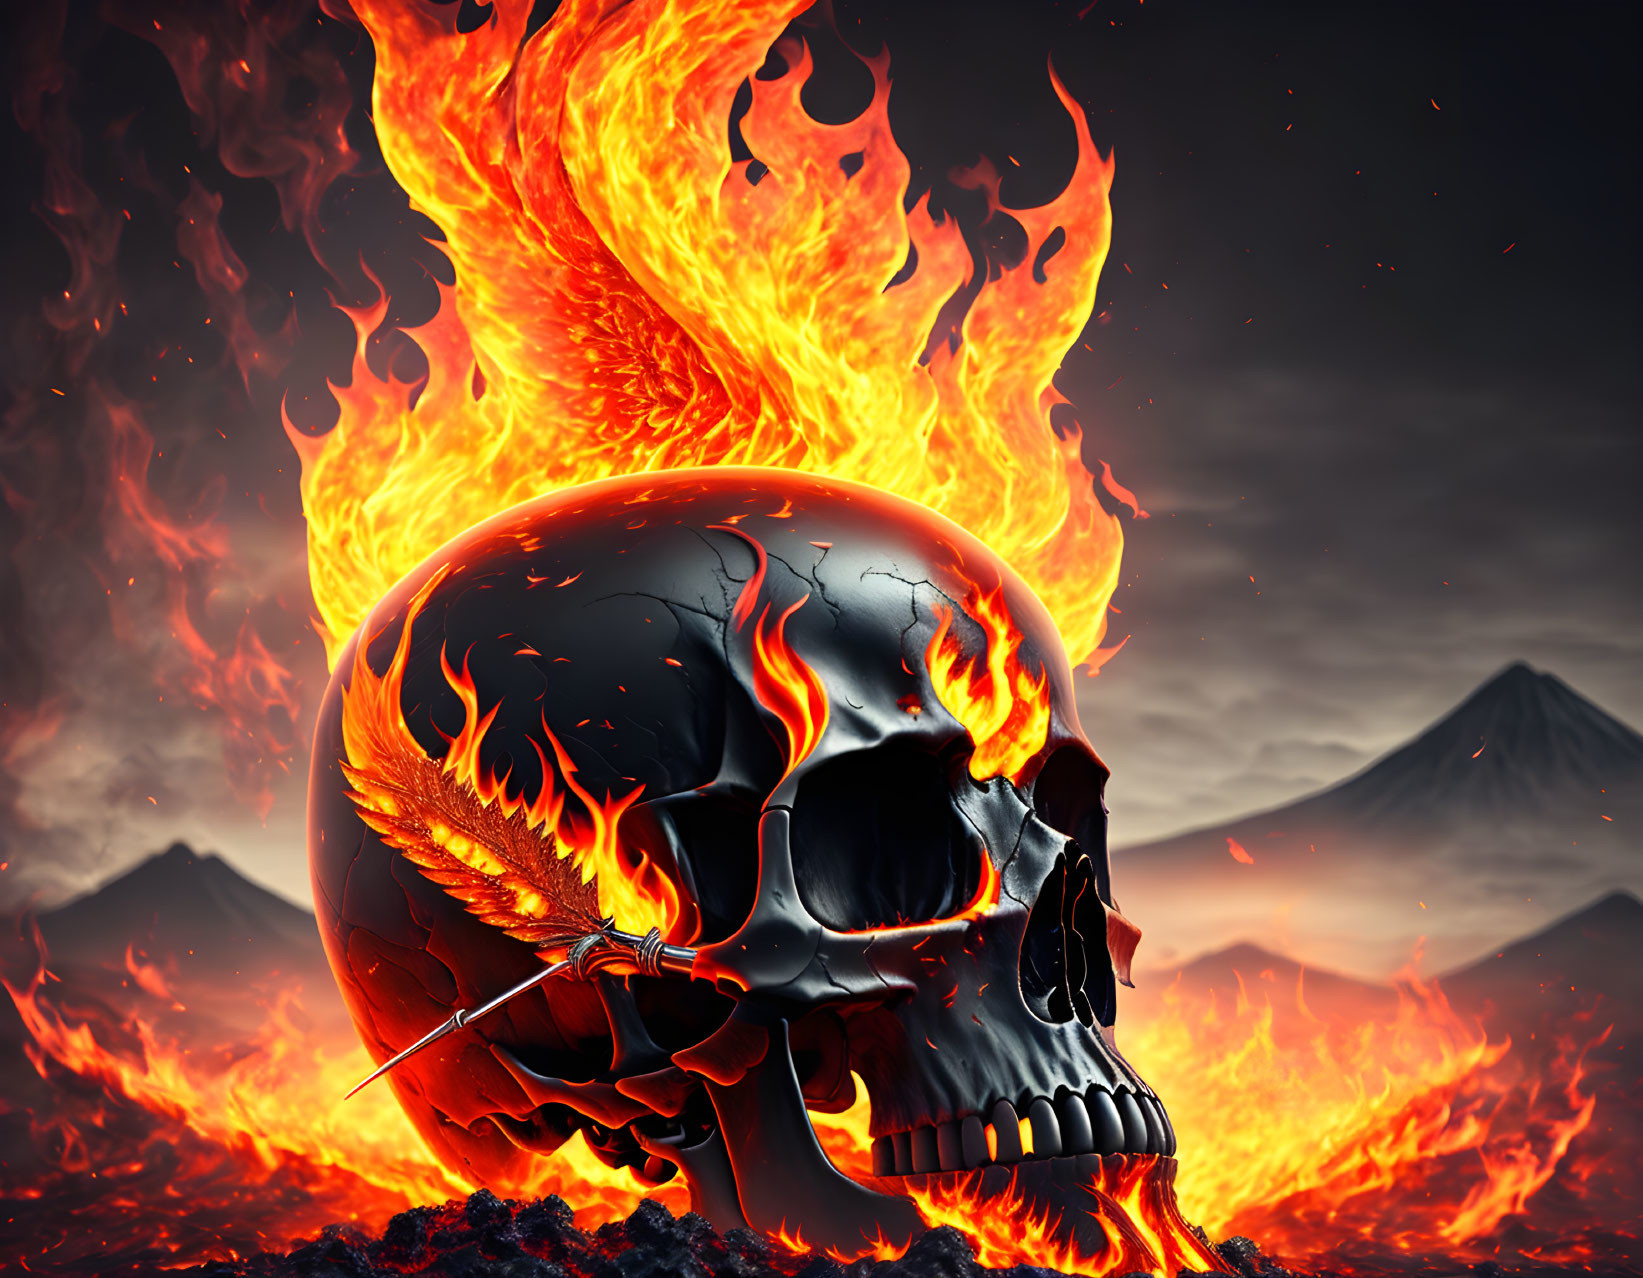 Flaming skull with orange and yellow flames on volcanic landscape